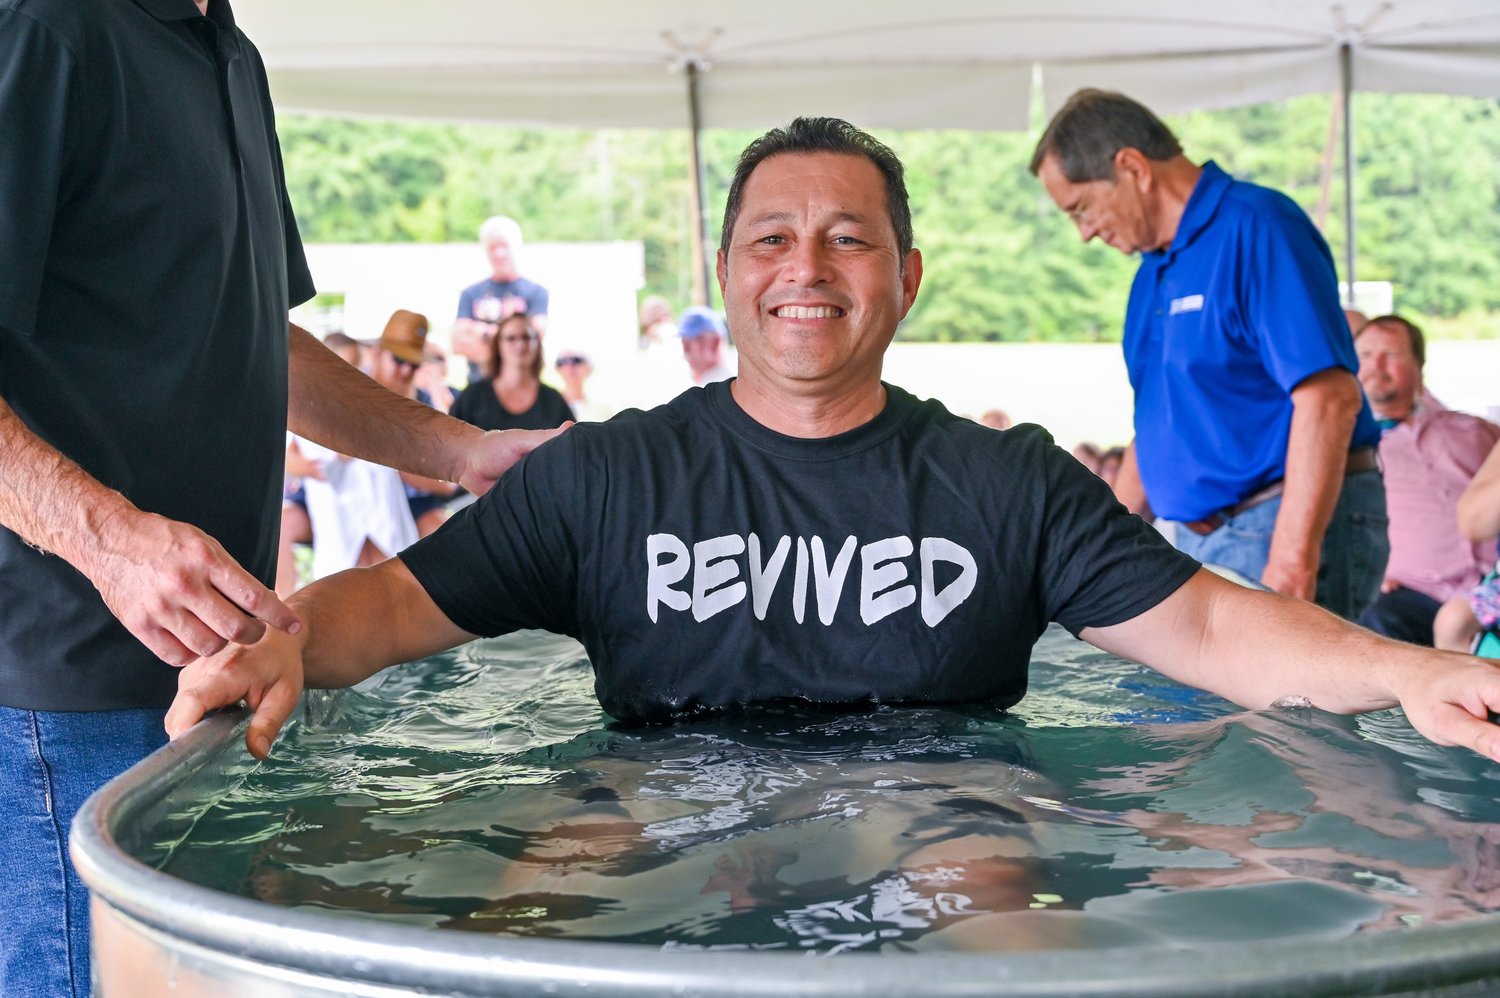 Danny Moreno smiles as he prepares for baptism at New Hope Baptist Church. With the pandemic in the past, the congregation recently saw 40 baptisms in 40 days.